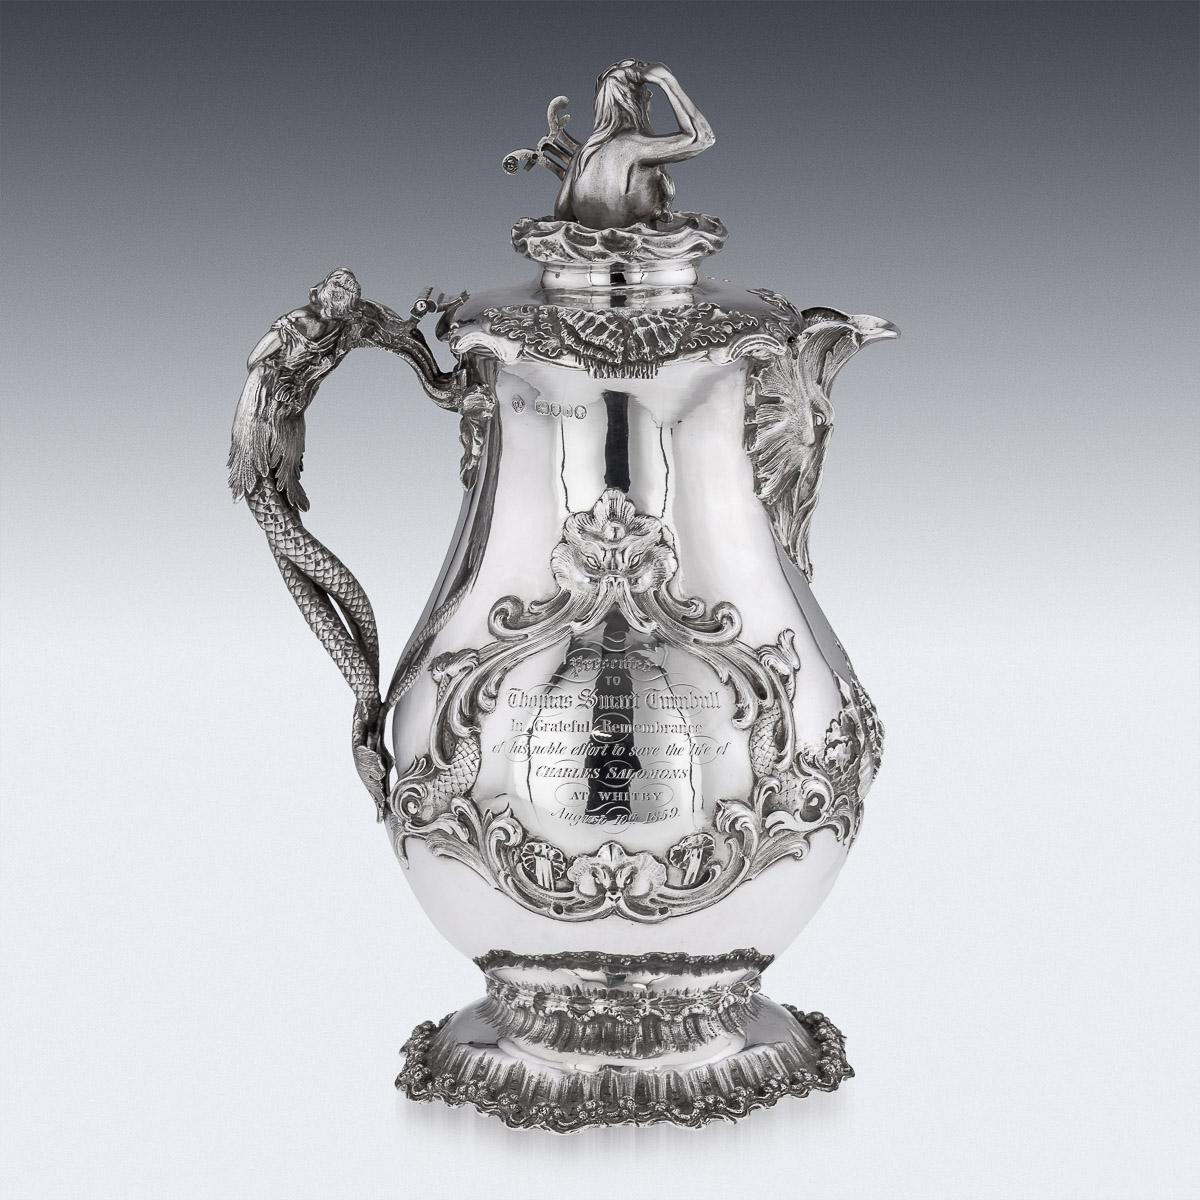 19th Century Victorian Solid Silver Nautical Jug, George Angell, c.1859 For Sale 1